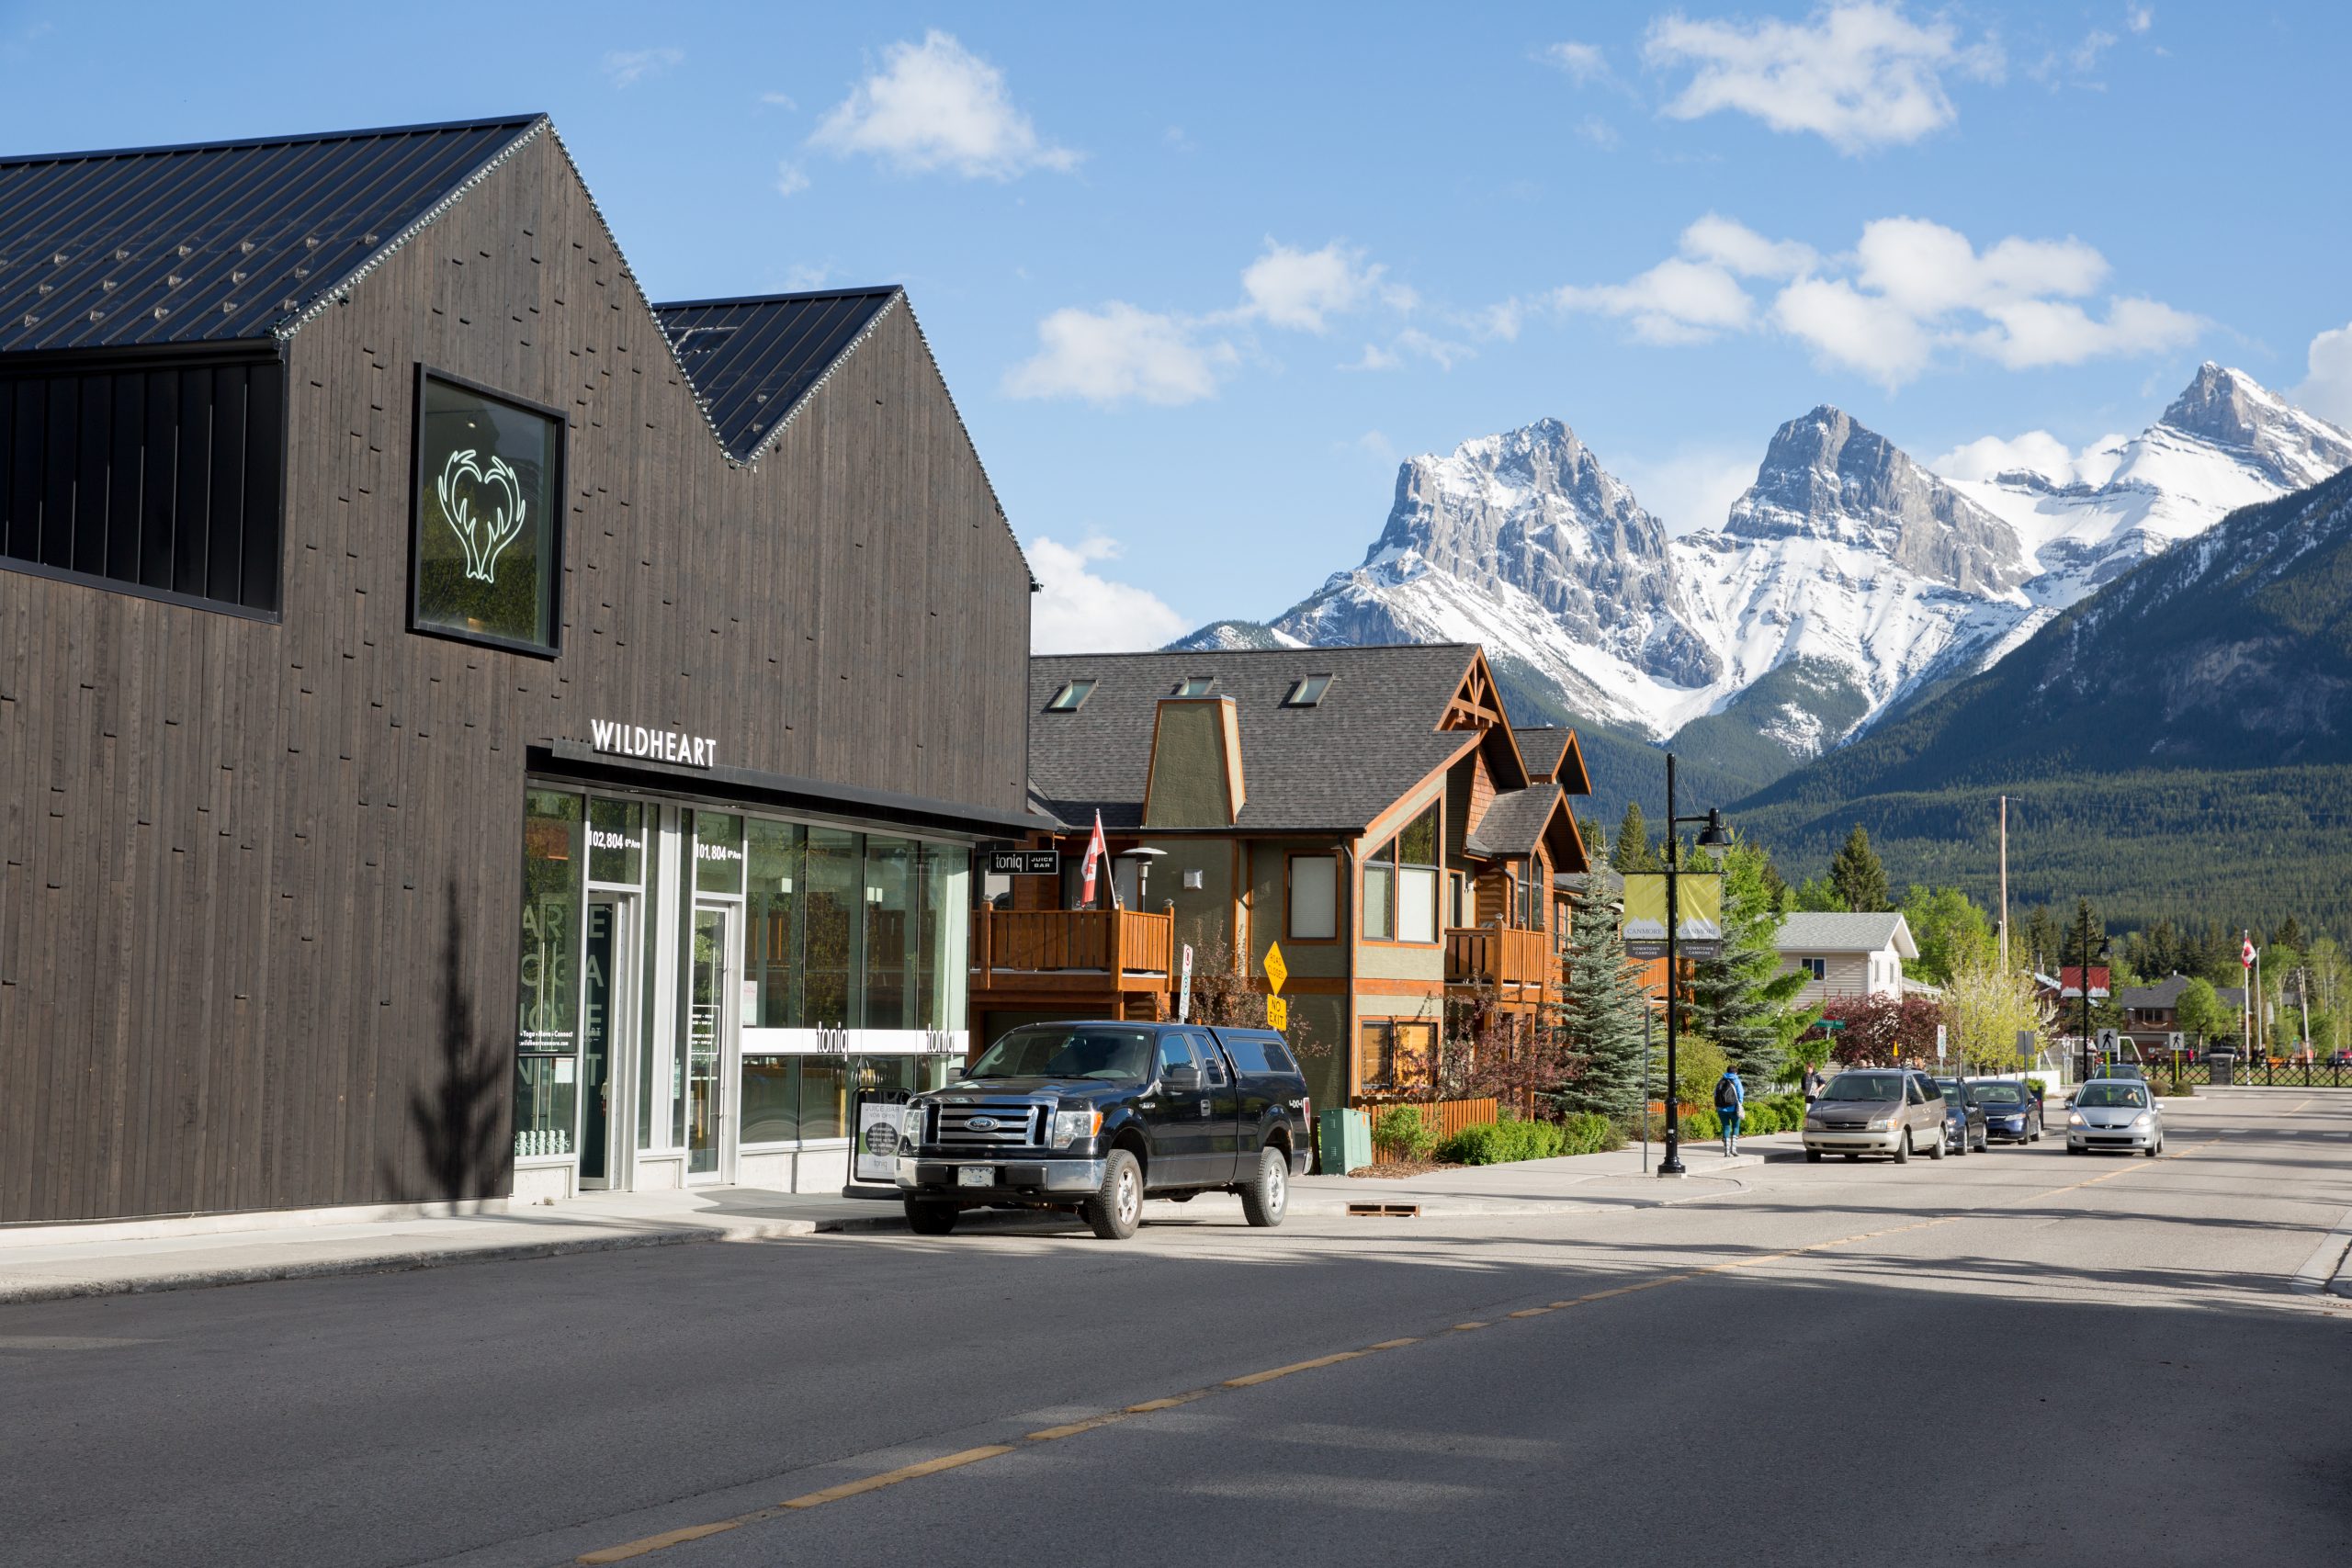 The exterior of WildHeart Canmore, a yoga and barre studio in the Rocky Mountains of Canada.